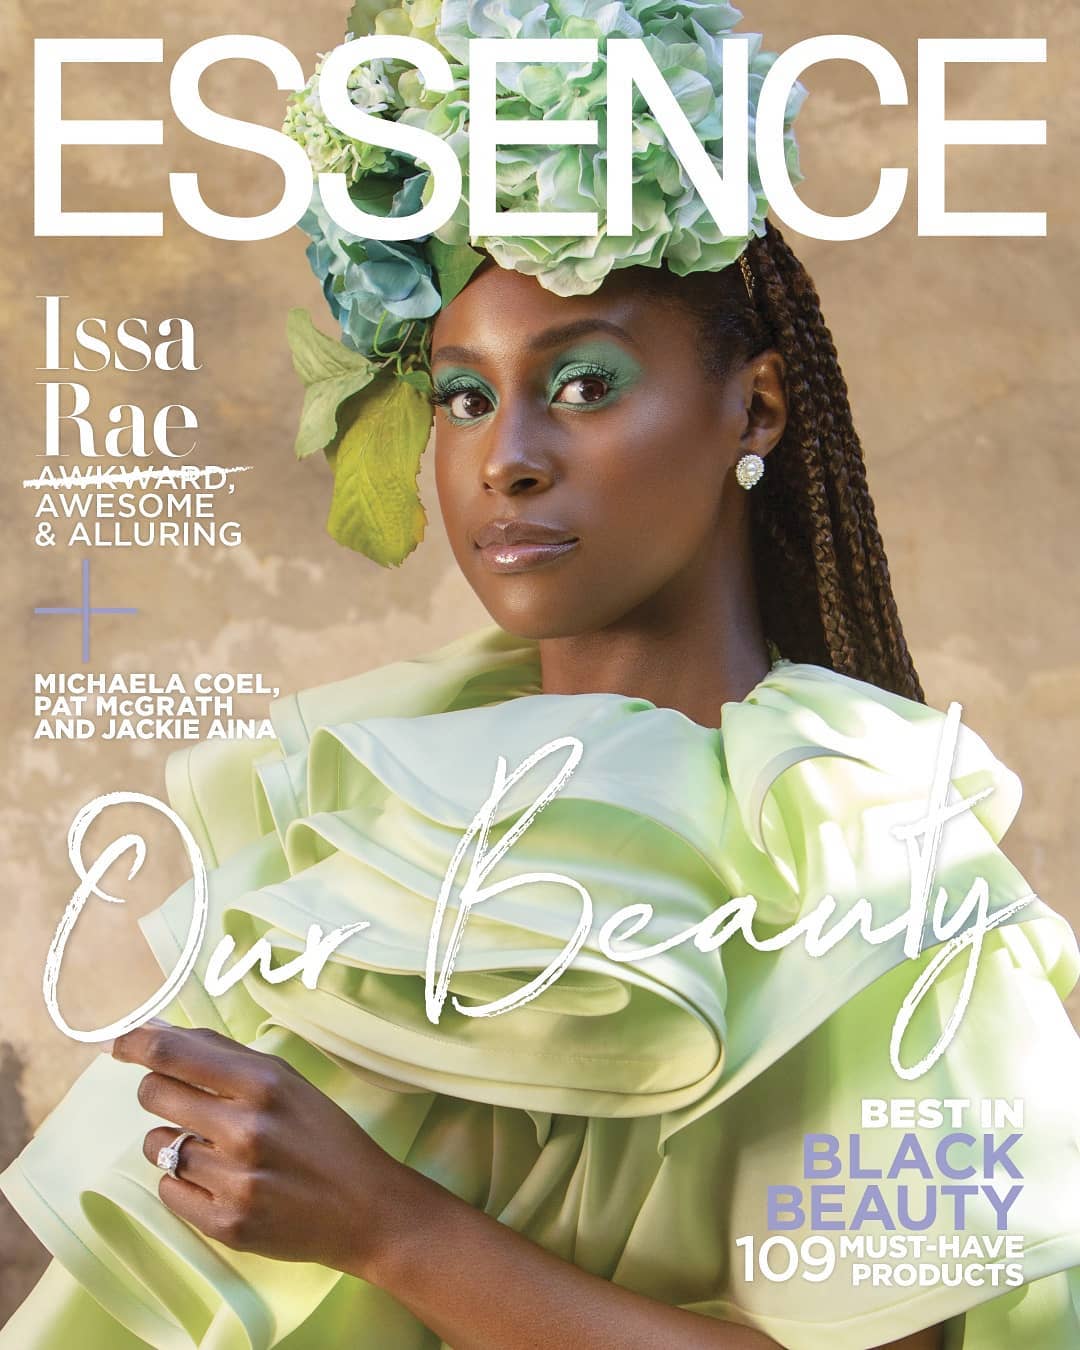 jaiyeorie + Engagement Rumours trails Issa Rae’s Essence Cover + her fiance 